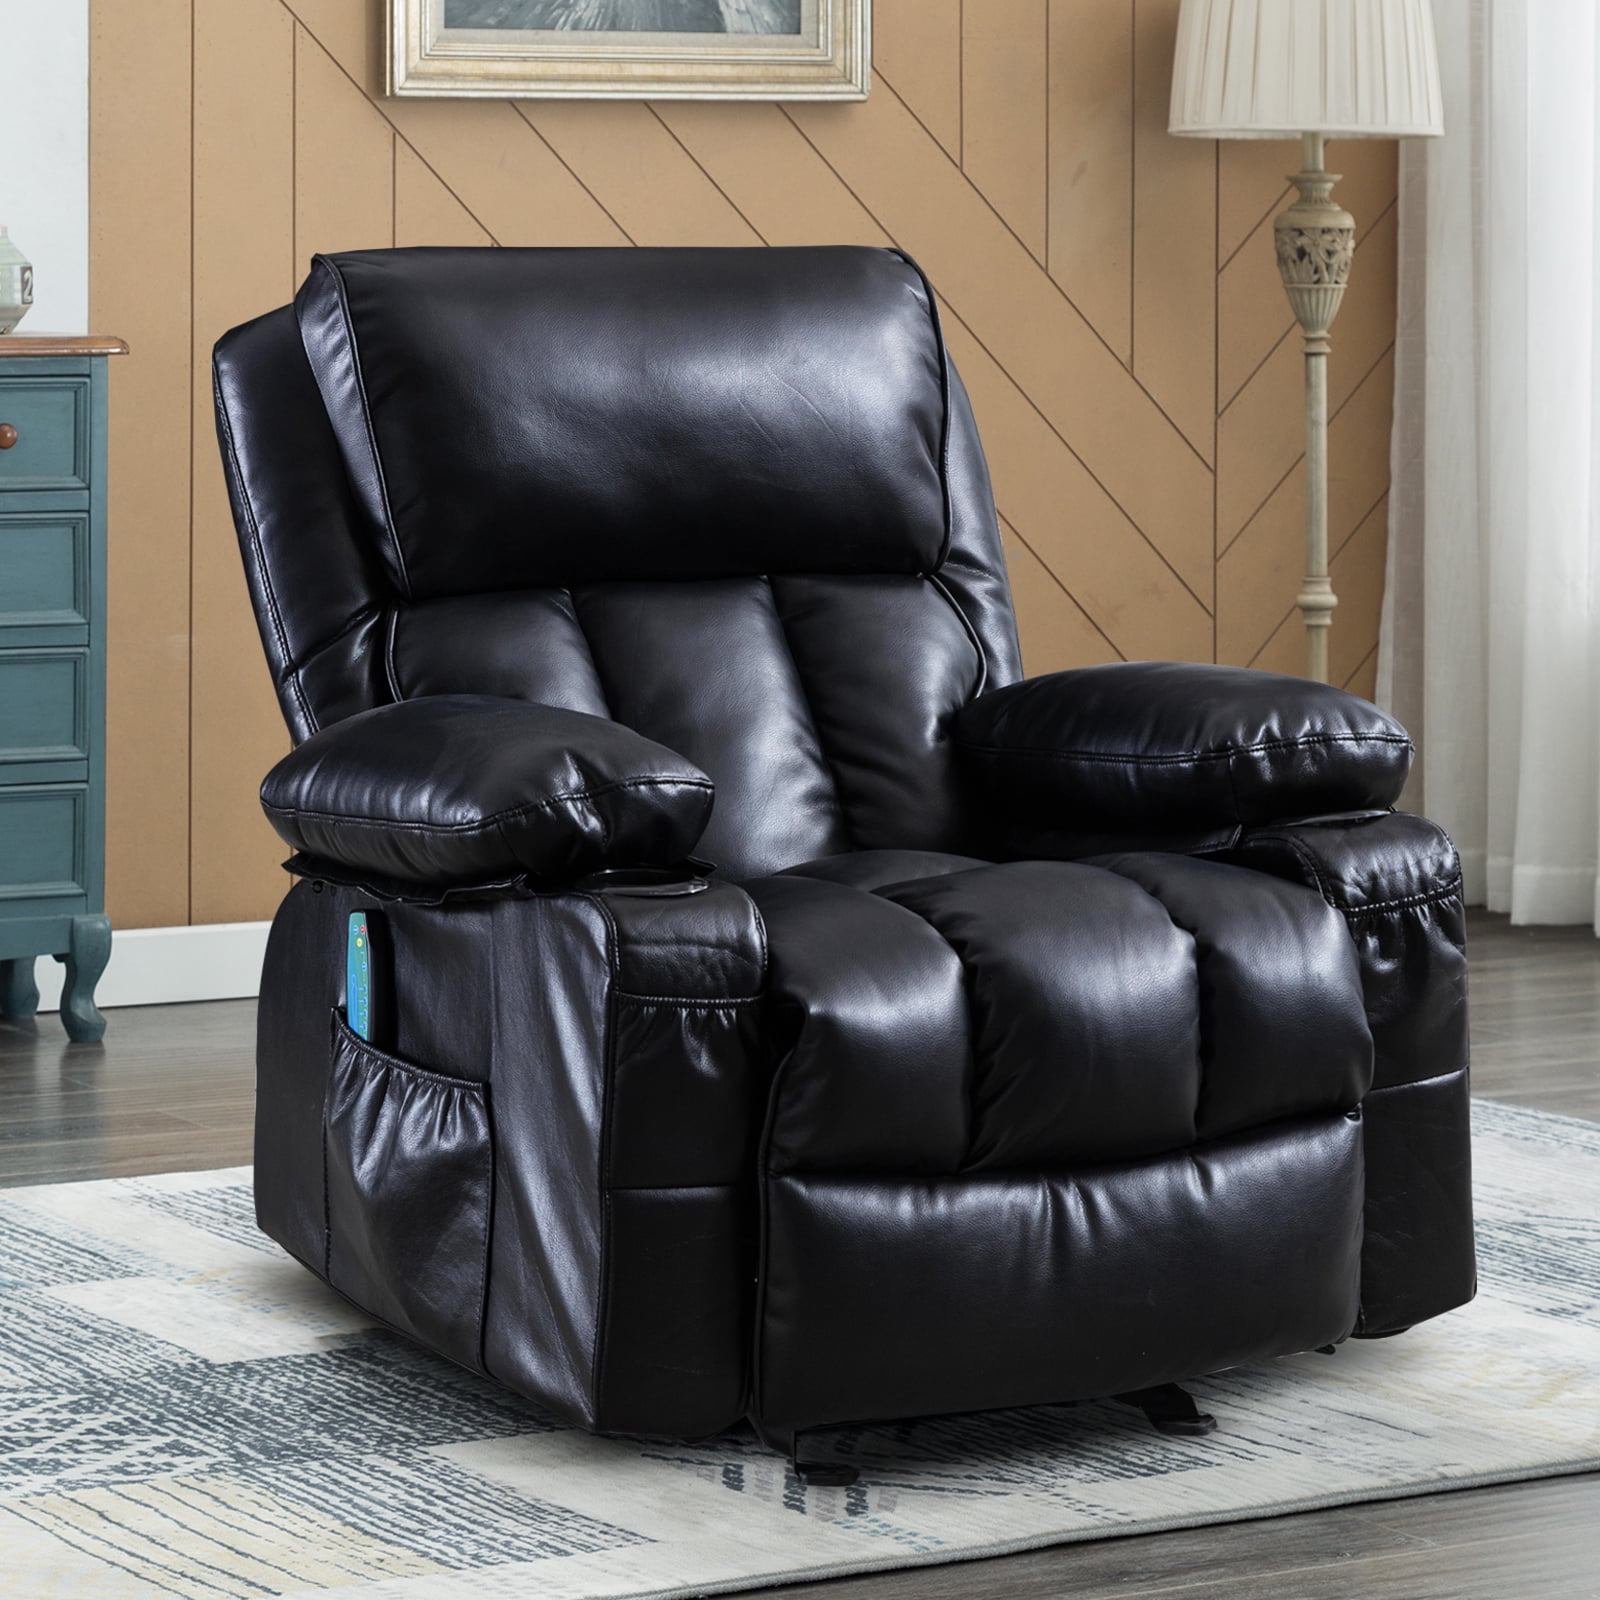 BTMWAY Heated Massage Recliner Chair, PU Leather Manual Recliner Couch with  Rocking Function, Cup Holder and Side Pocket, Ergonomic Reclining Sofa